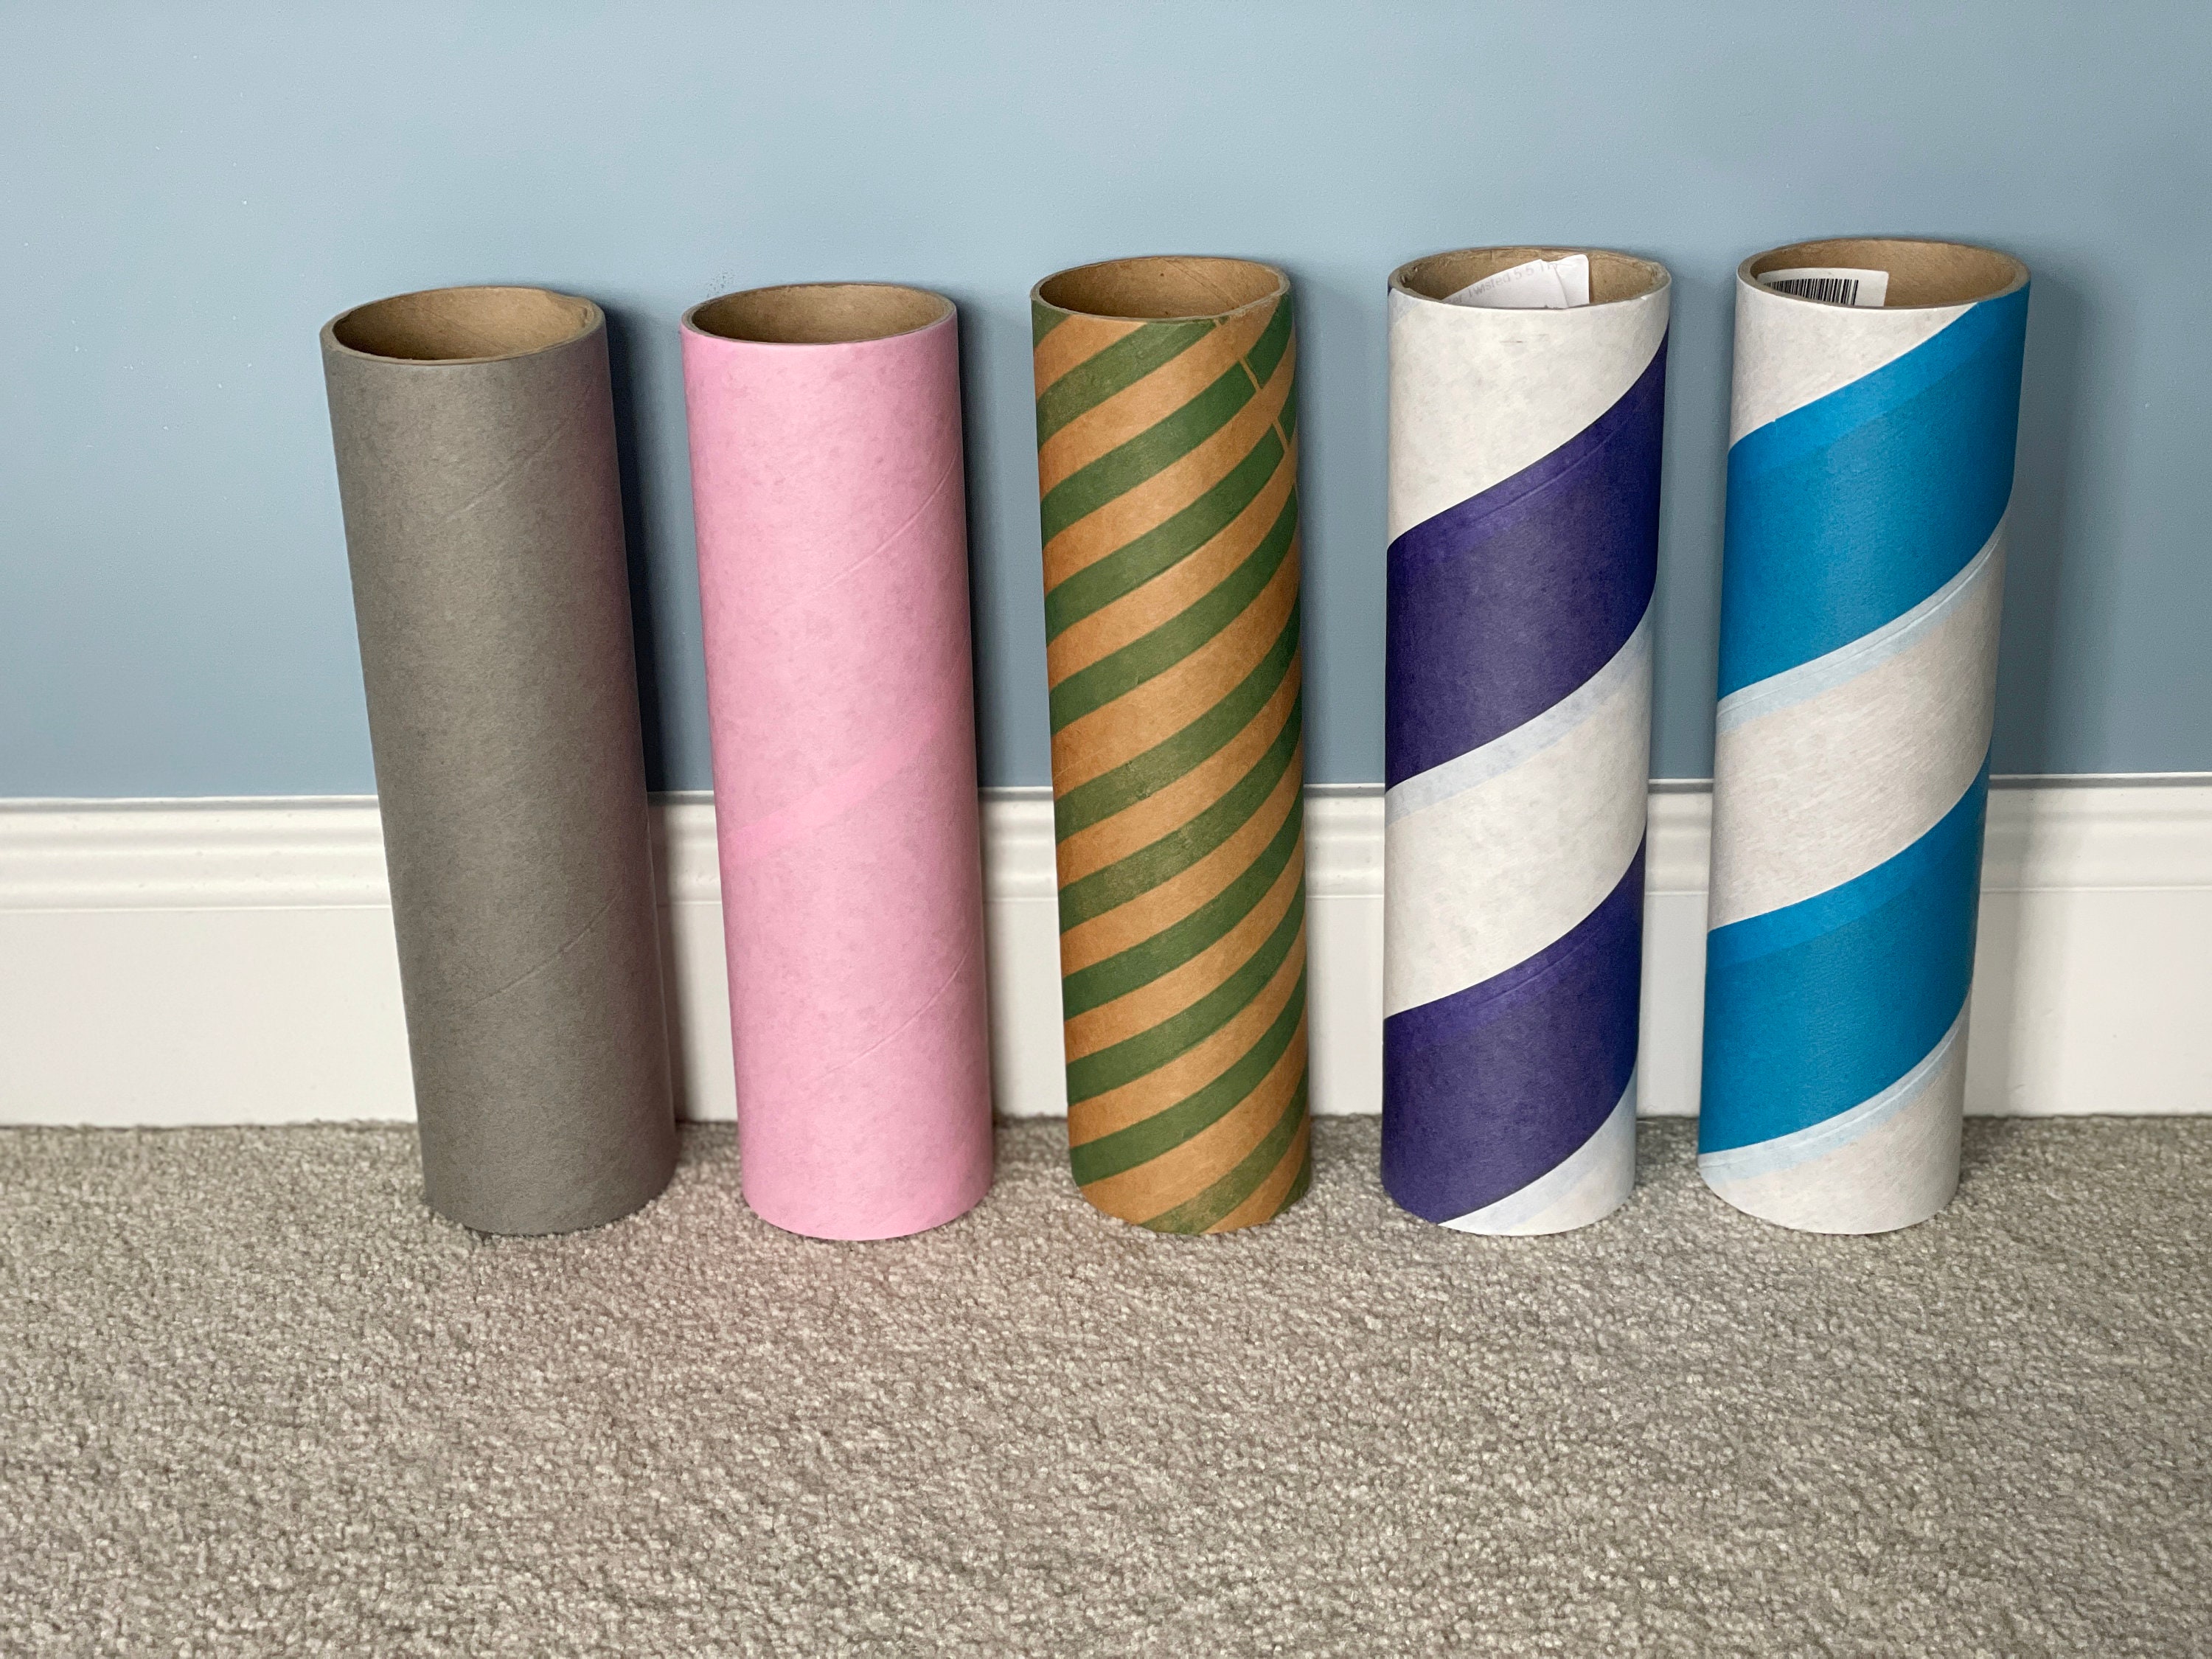 FREE SHIP Lot of 25 or 50 Empty Household Paper Towel Rolls Cardboard Tubes  Art & Crafts Projects 